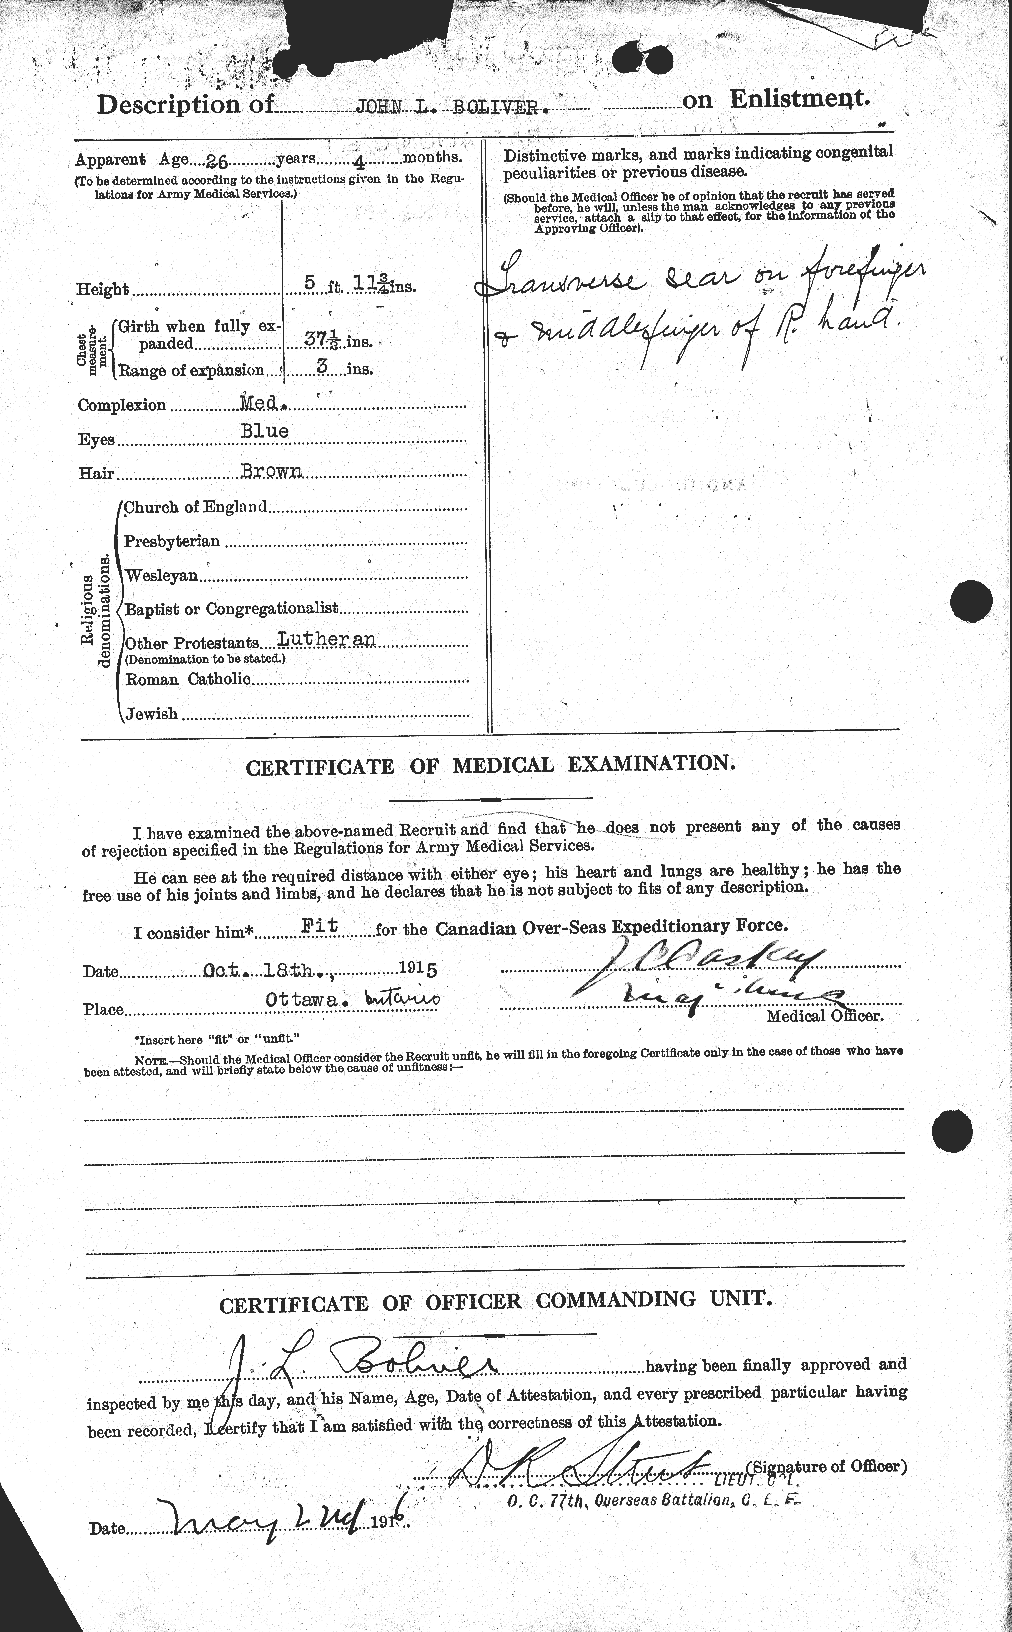 Personnel Records of the First World War - CEF 249889b